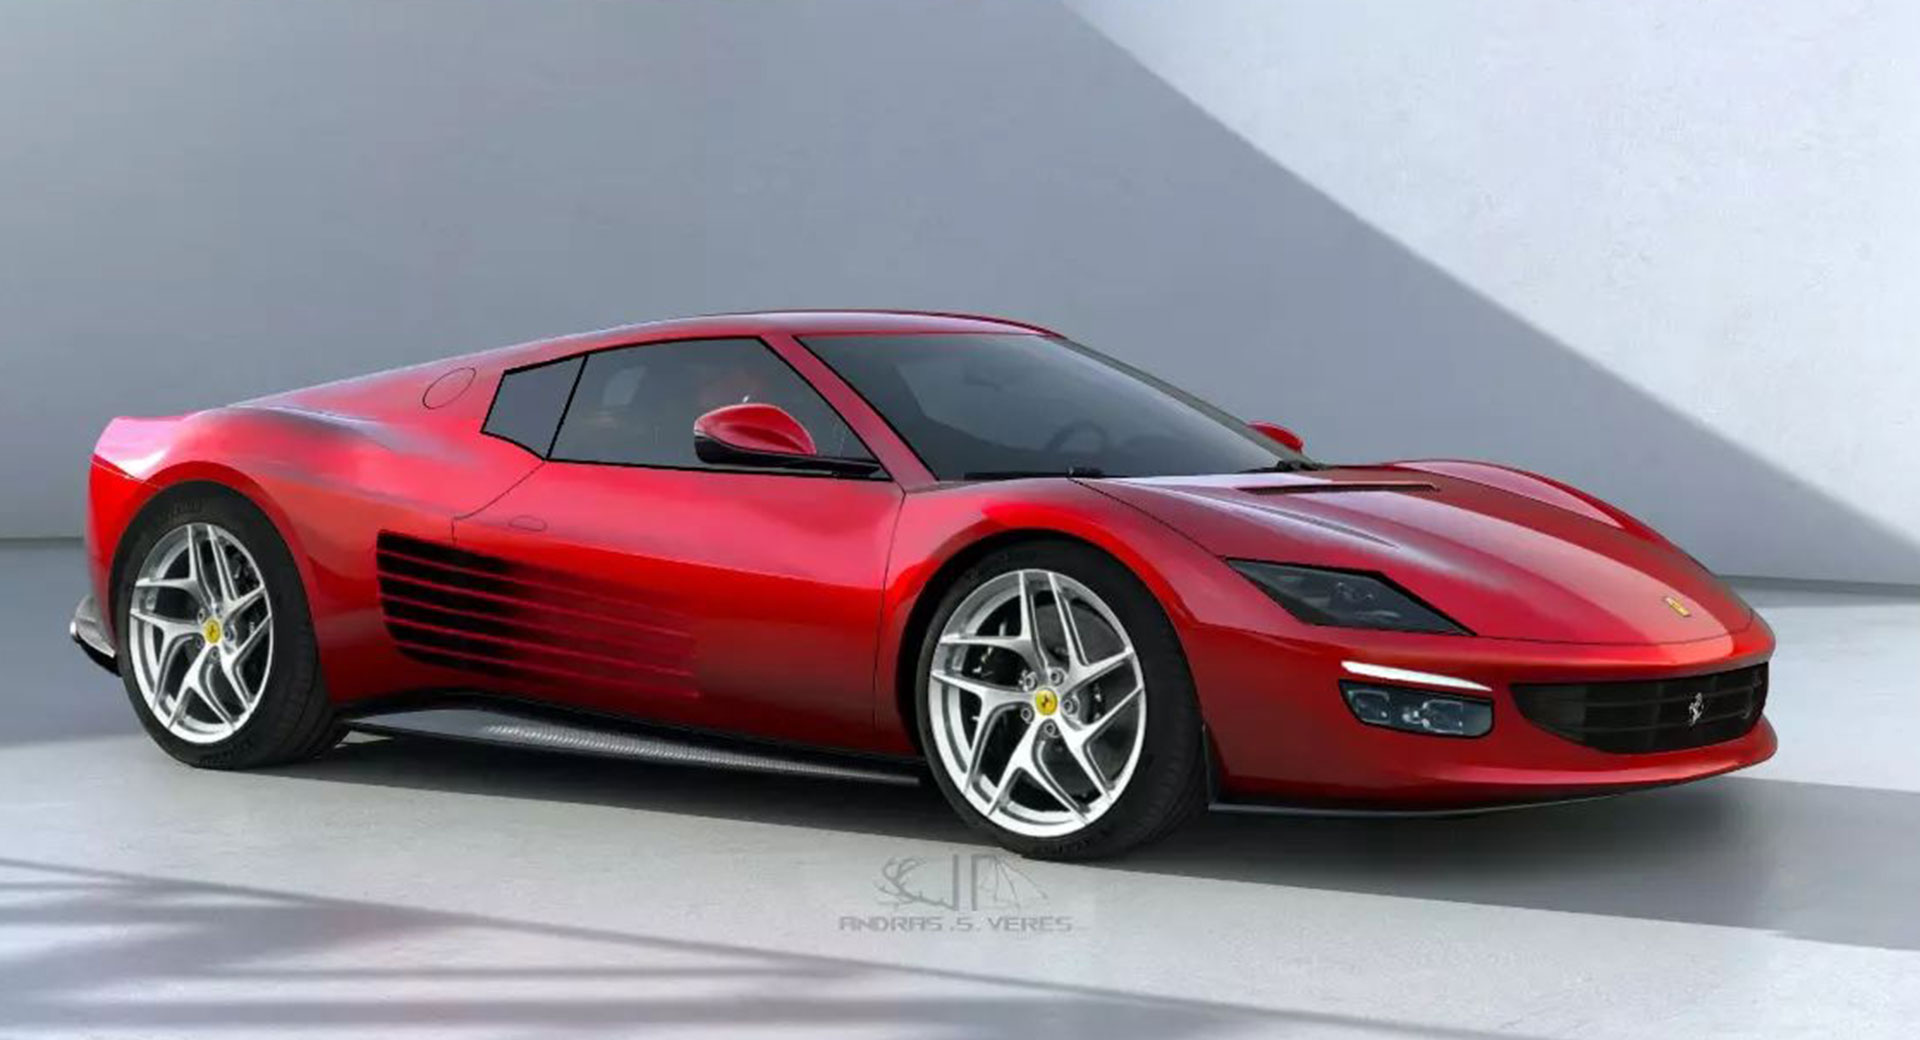 Ferrari has a good reason for staying away from all-electric cars